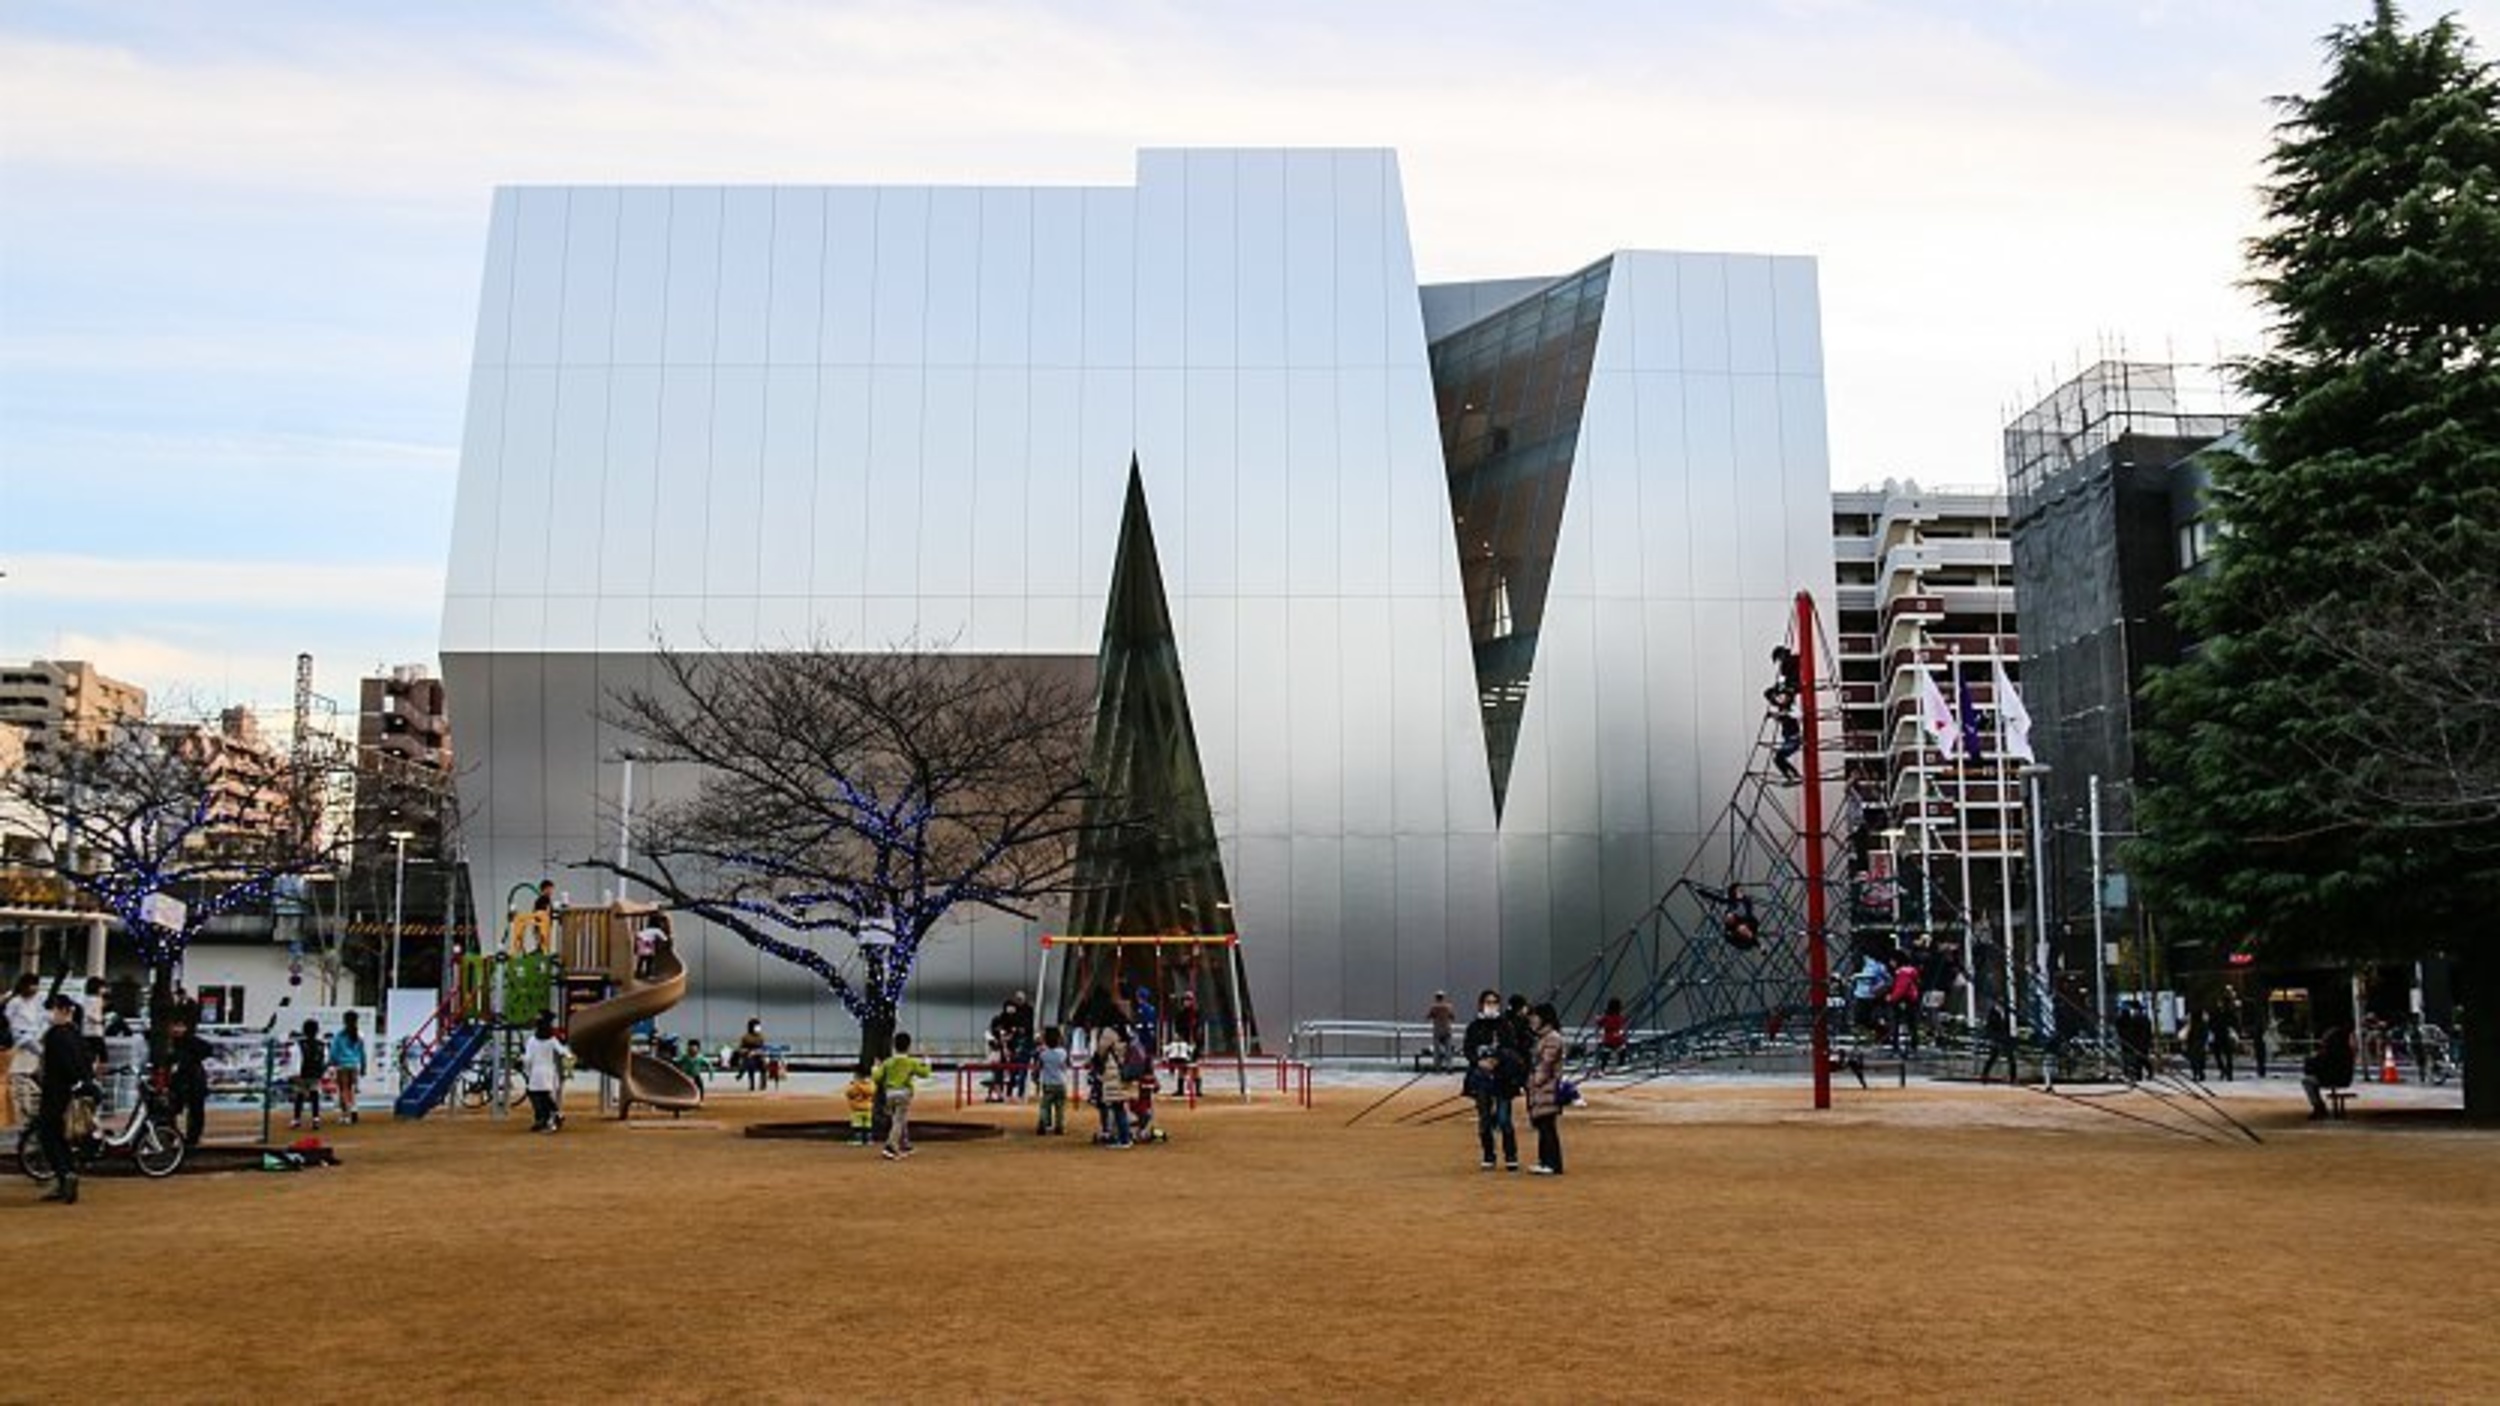 <p>Tokyo is the center of Japan's art scene, with museums packed with the country's biggest names. Nezu Museum and Yayoi Kasuma Museum are two spots you should check out, boasting an array of modern pieces that rival anything in the country.</p><p>You may also like: <a href='https://www.yardbarker.com/lifestyle/articles/18_things_you_think_are_normal_but_are_actually_uniquely_american_031224/s1__39111167'>18 things you think are normal but are actually uniquely American</a></p>